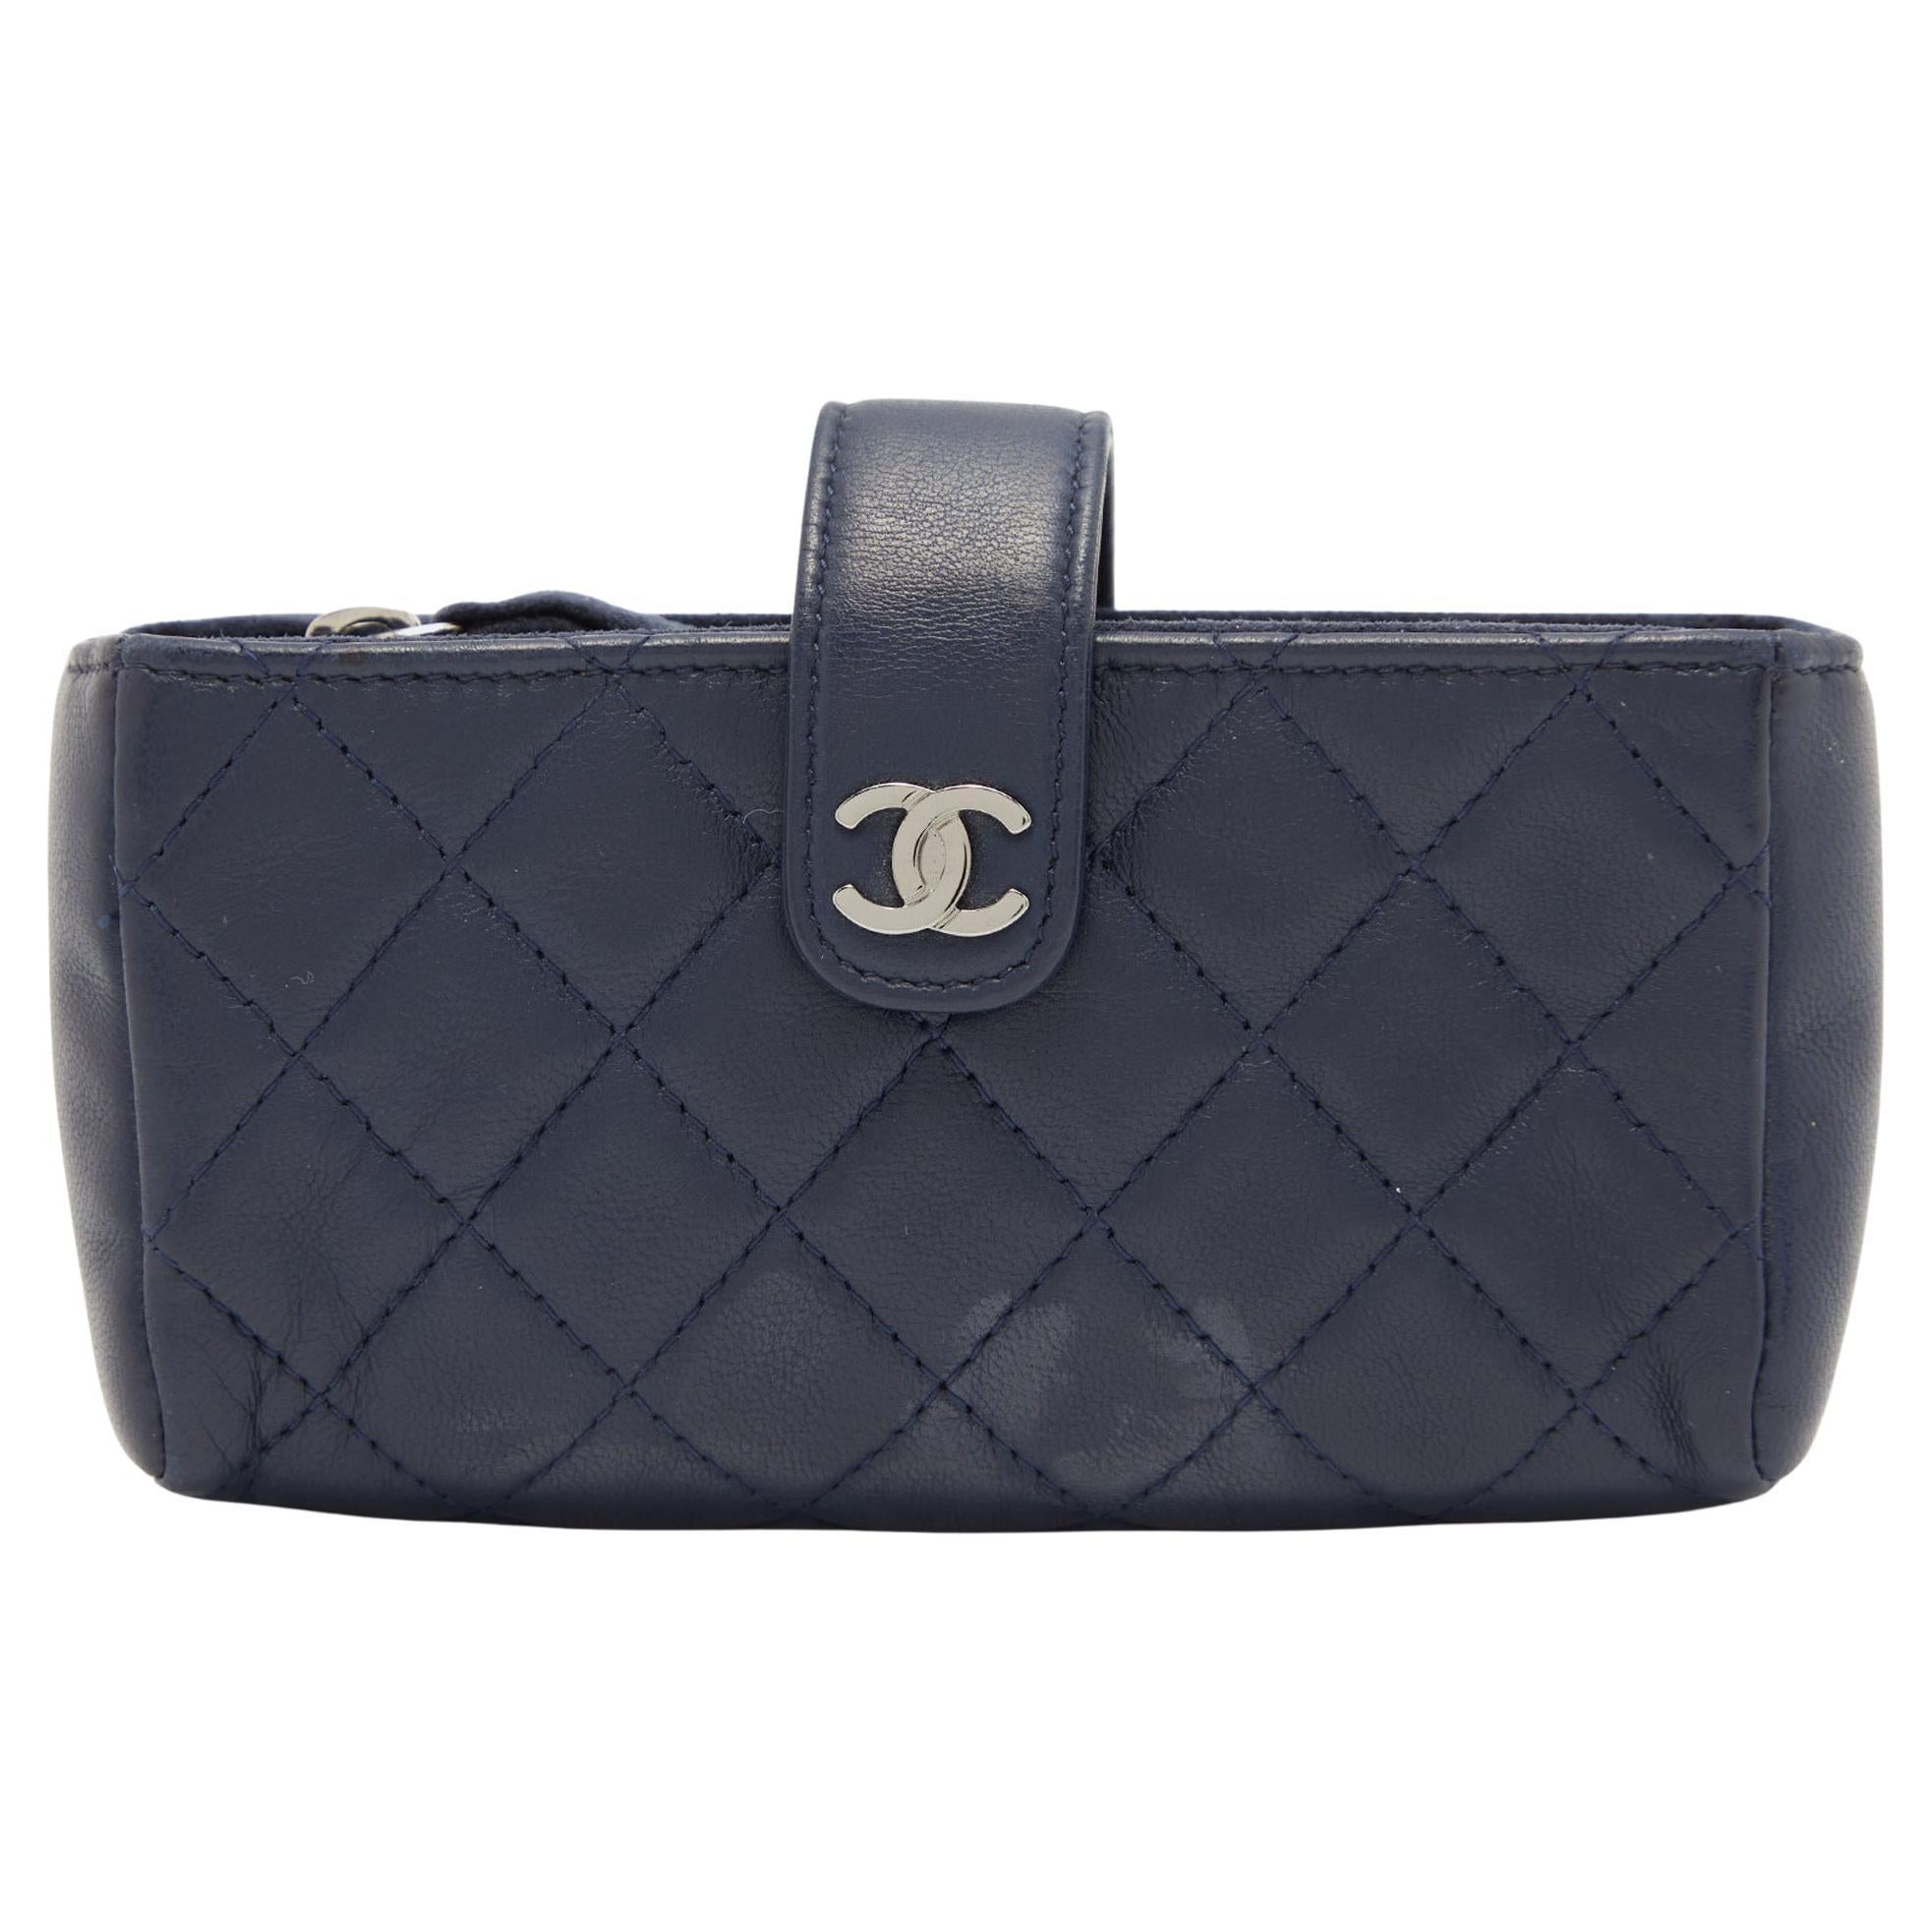 Chanel Blue Quilted Leather CC Phone Pouch